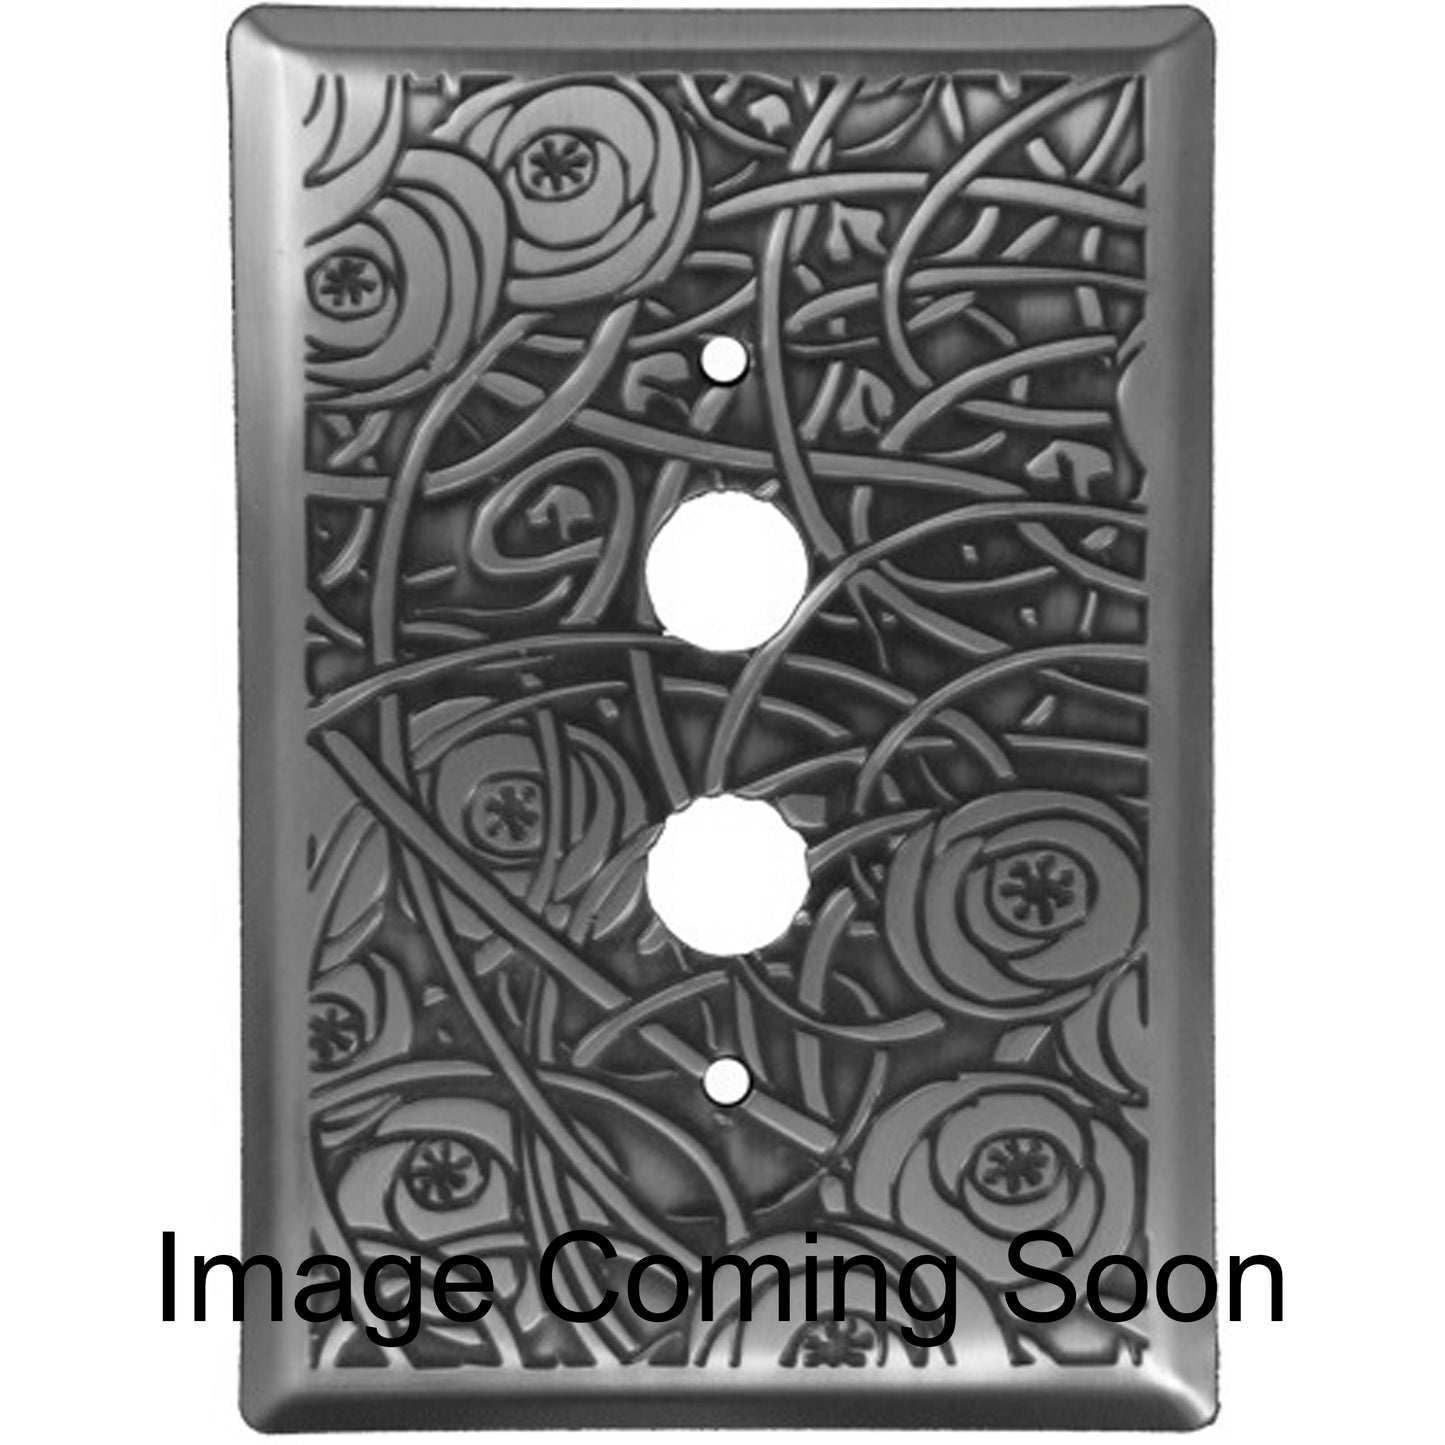 Deco Floral Oil Rubbed Copper 1 Pushbutton Switchplate:Wallplatesonline.com